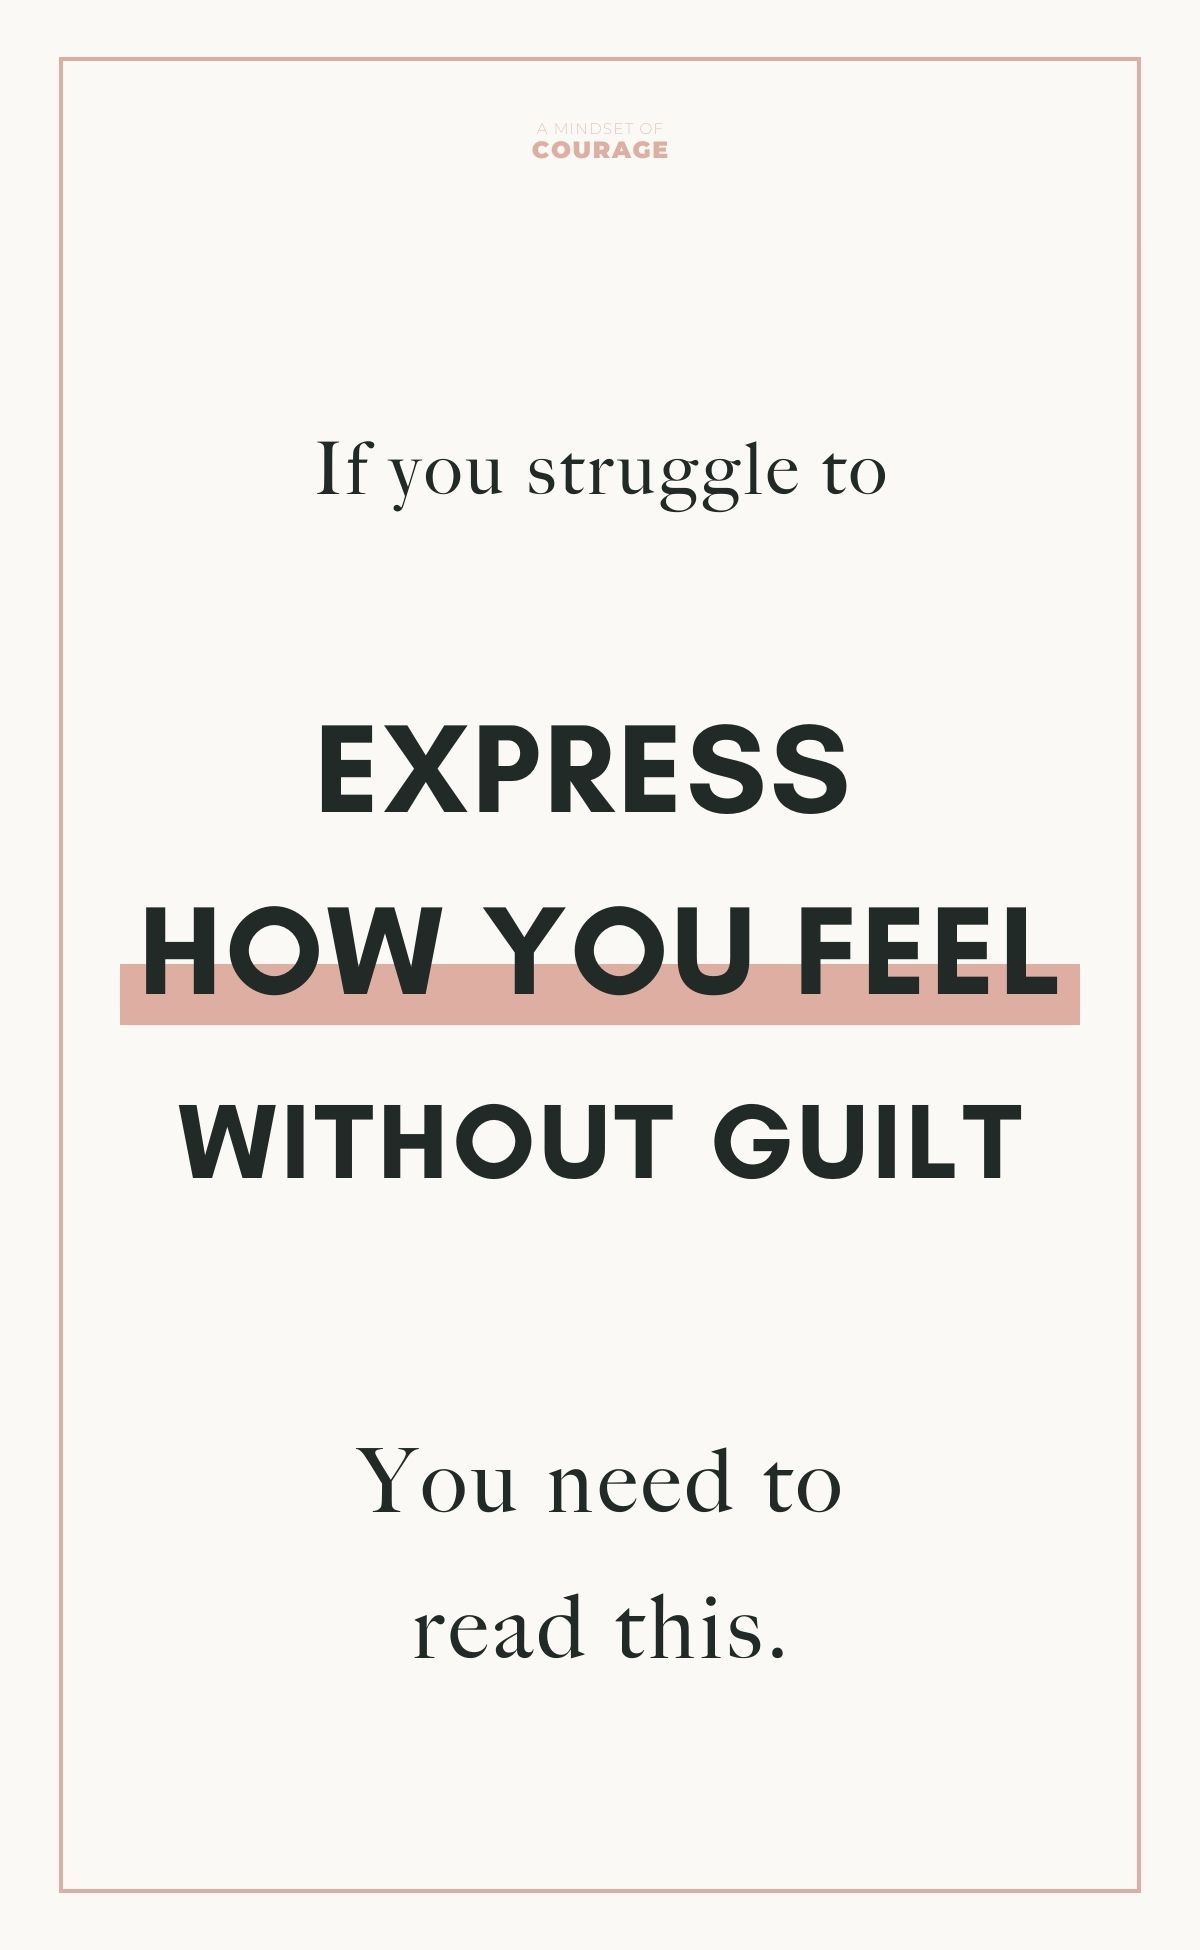 How to Be Free of Guilt in Relationships